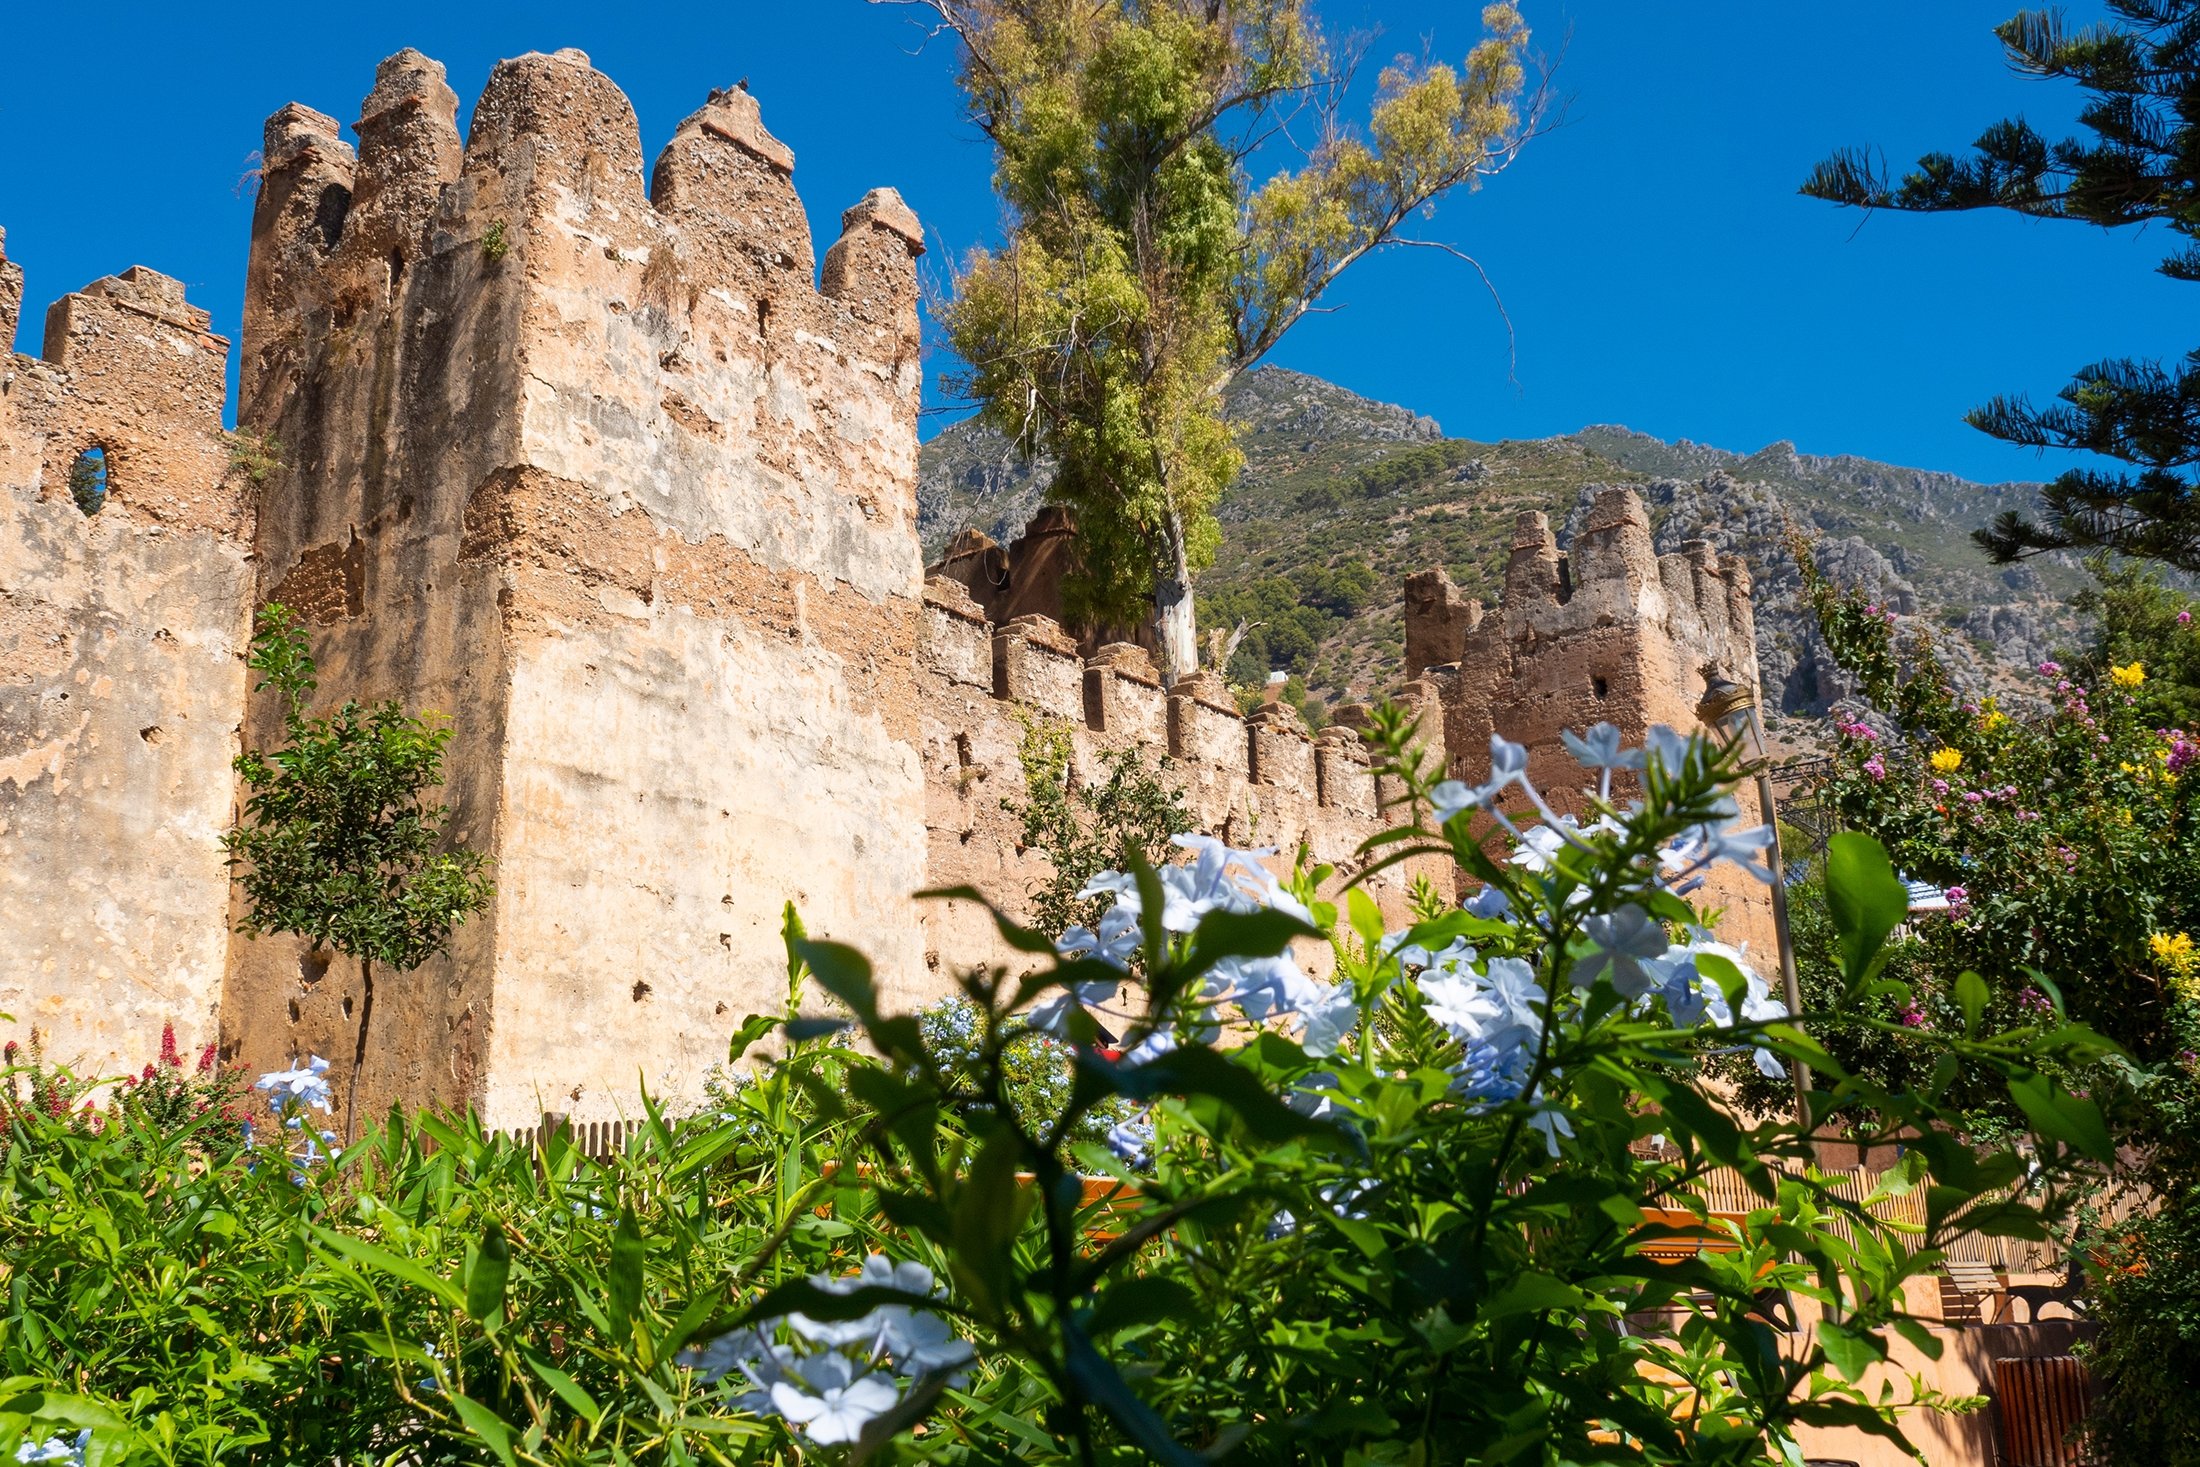 The fortress with its gardens is one of the classic sights in Chefchaouen, Morroco. (dpa Photo)